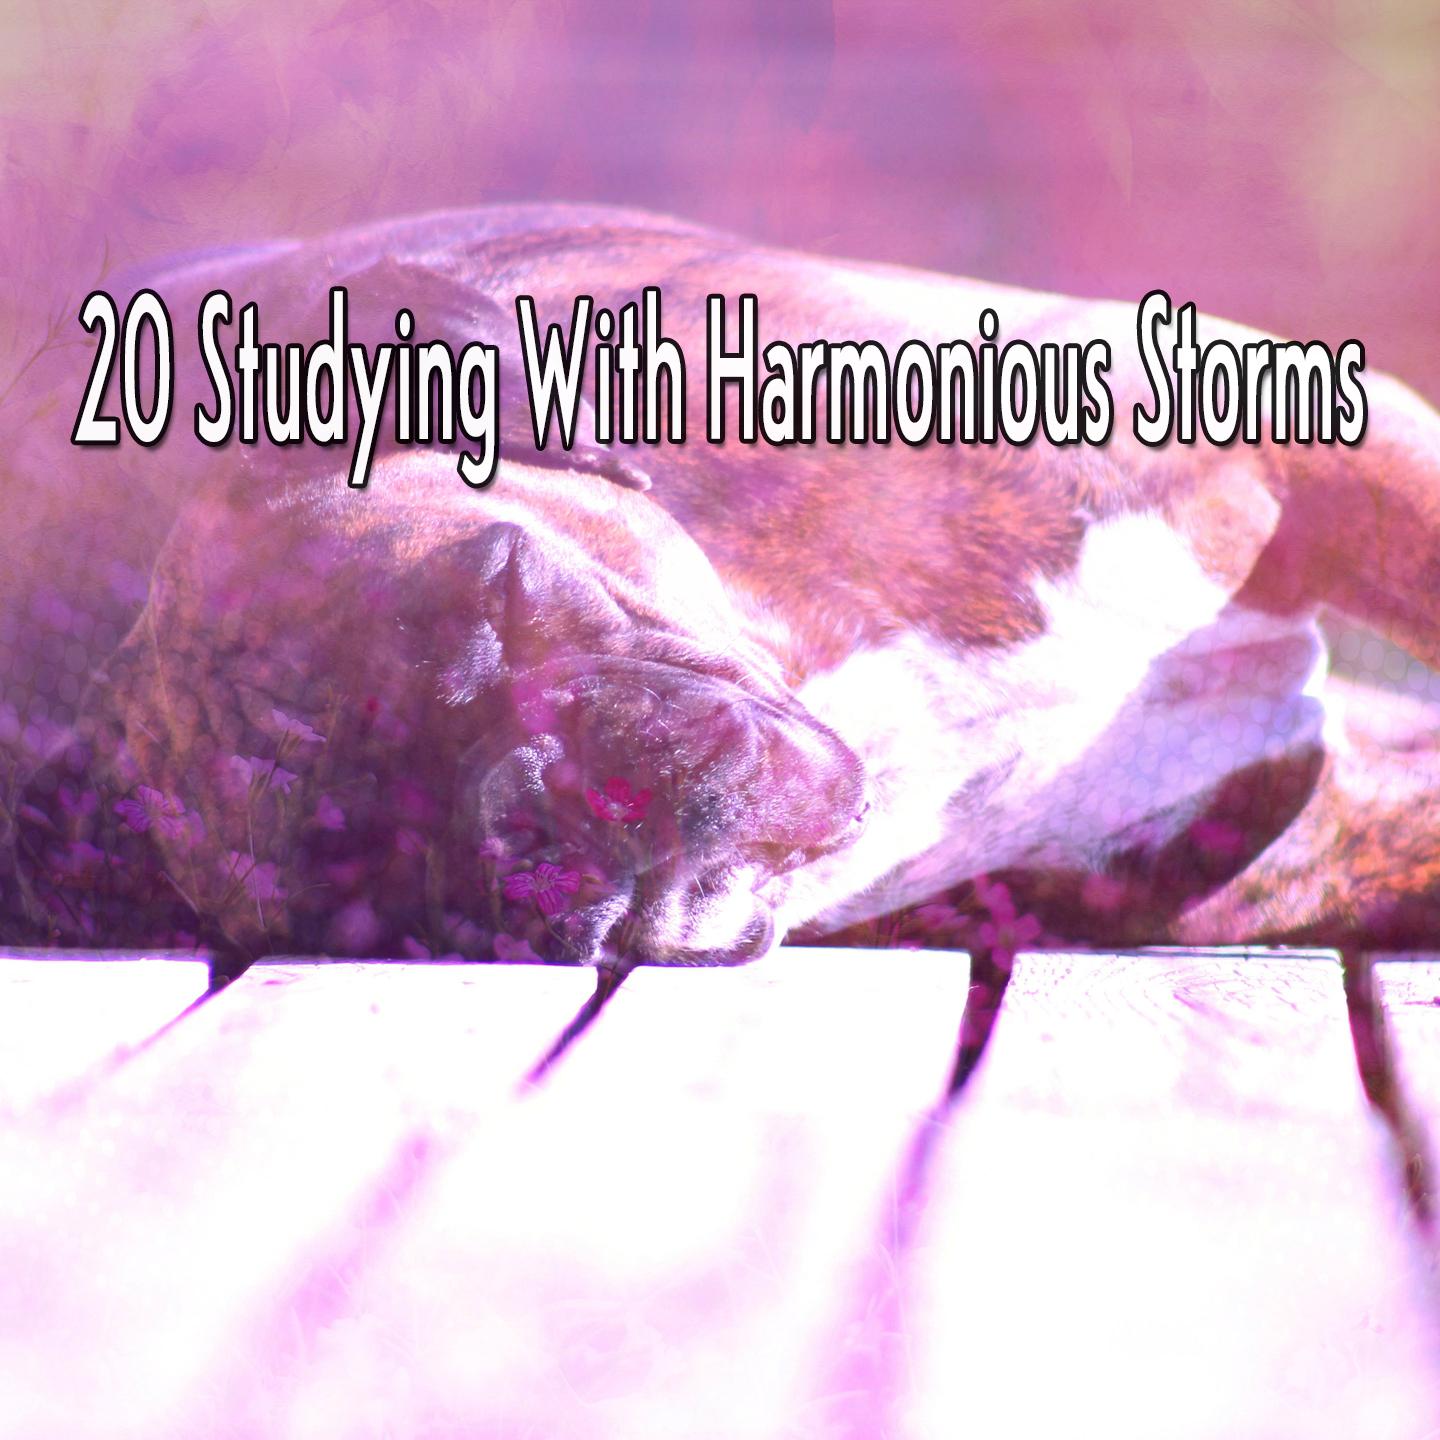 20 Studying With Harmonious Storms